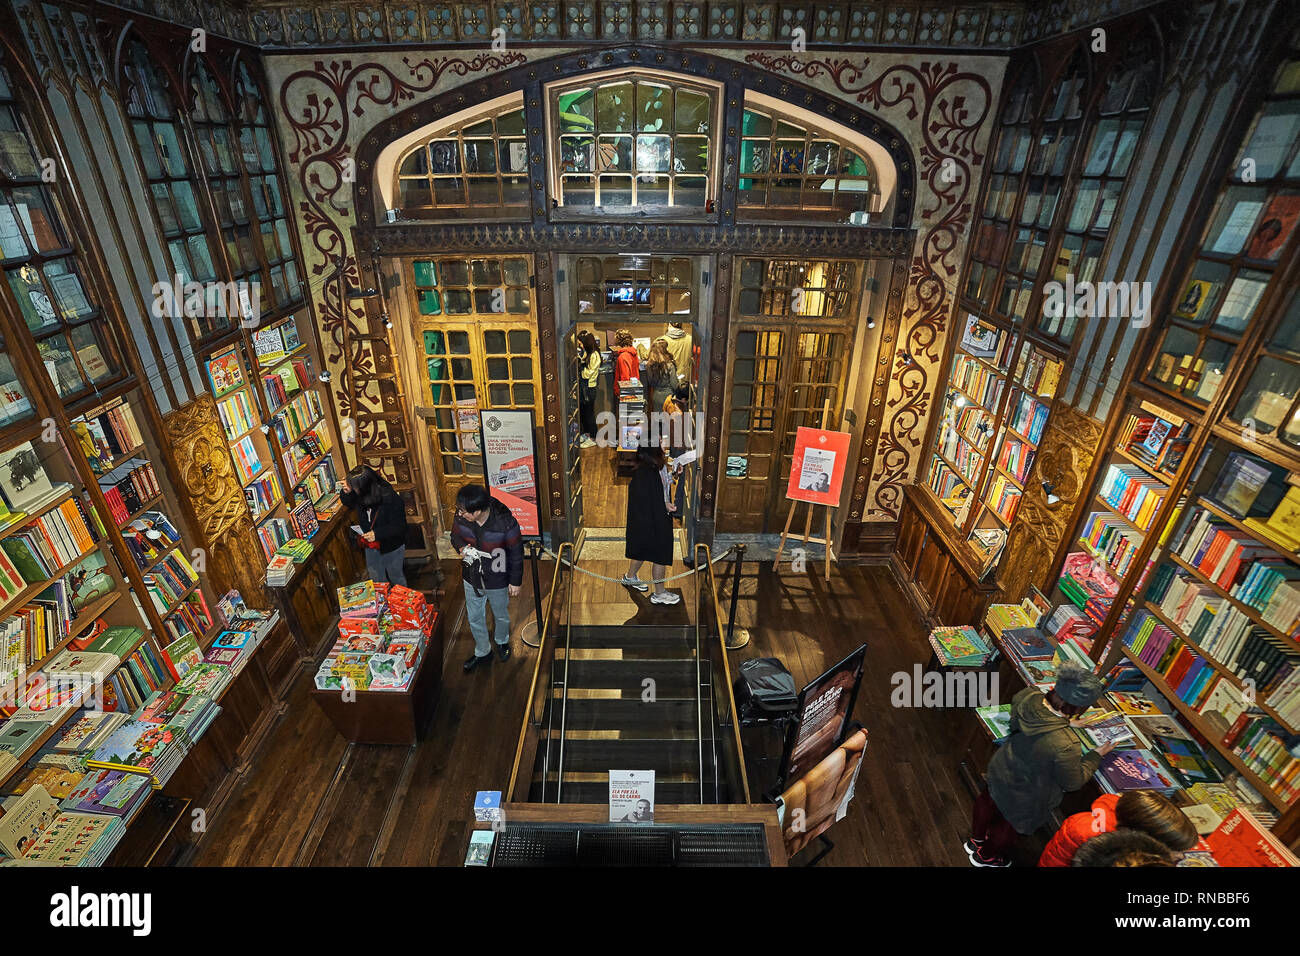 Library Lello and Irmao a bookstore that has served as a stage for some  scenes in films like Harry Potter in the city of Porto, Portugal, Europe  Stock Photo - Alamy